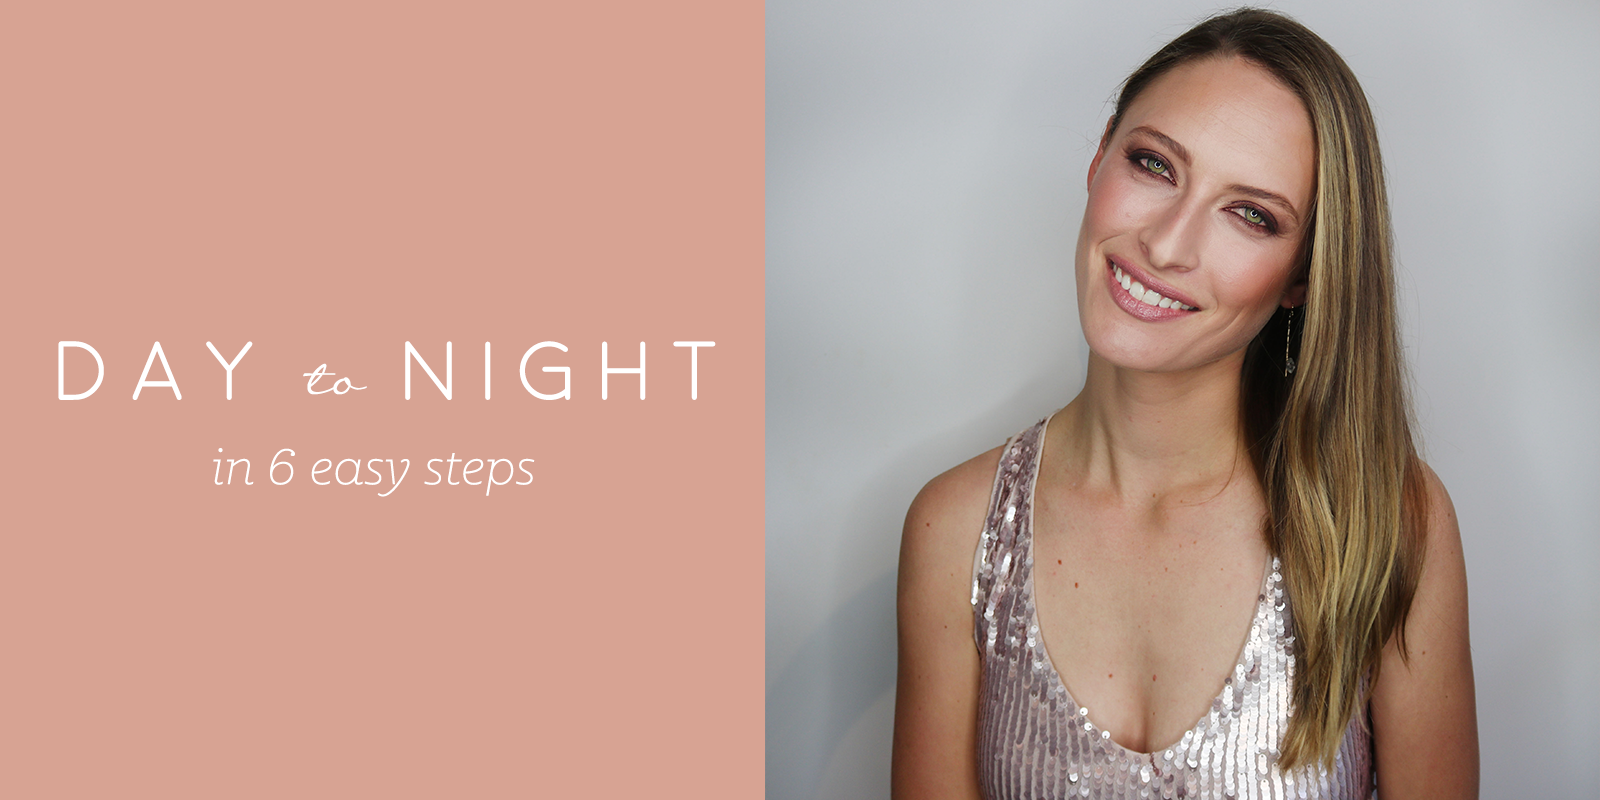 Holiday Ready! Go from everyday to glam in 6 easy steps!